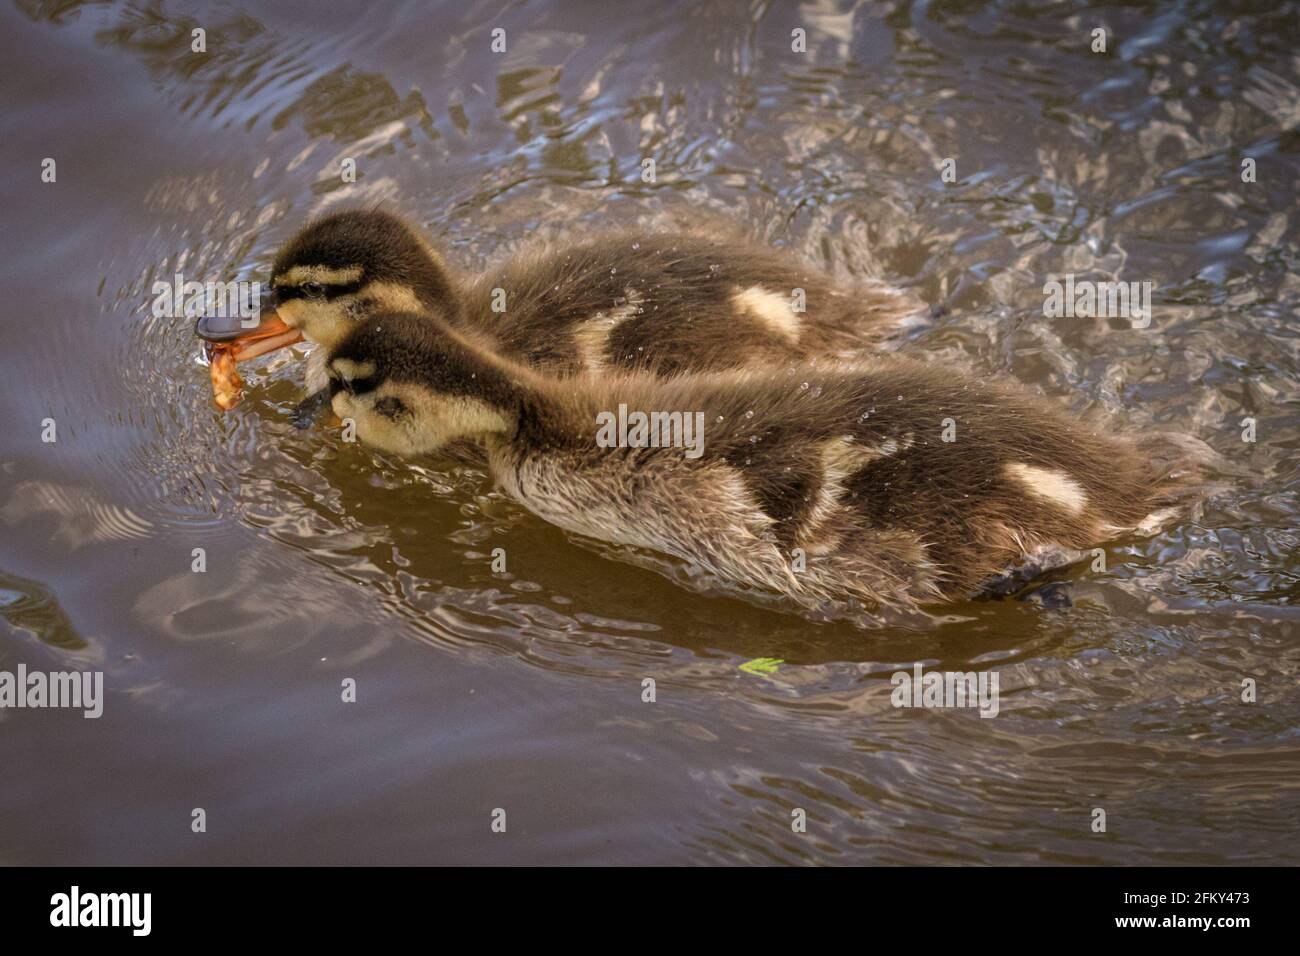 Haltern, NRW, Germany. 04th May, 2021. All ducklings have survived the recent storms and are happily hunting for breadcrumbs. A male mandarin duck (Aix galericulata) and mallard hen (Anas platyrhynchos) patiently look after 12 ducklings together. They have been spotted looking after a lively brood of 12 ducklings for several days, but it is unclear if the mandarin has fathered the duckings or adopted the brood. I Credit: Imageplotter/Alamy Live News Stock Photo